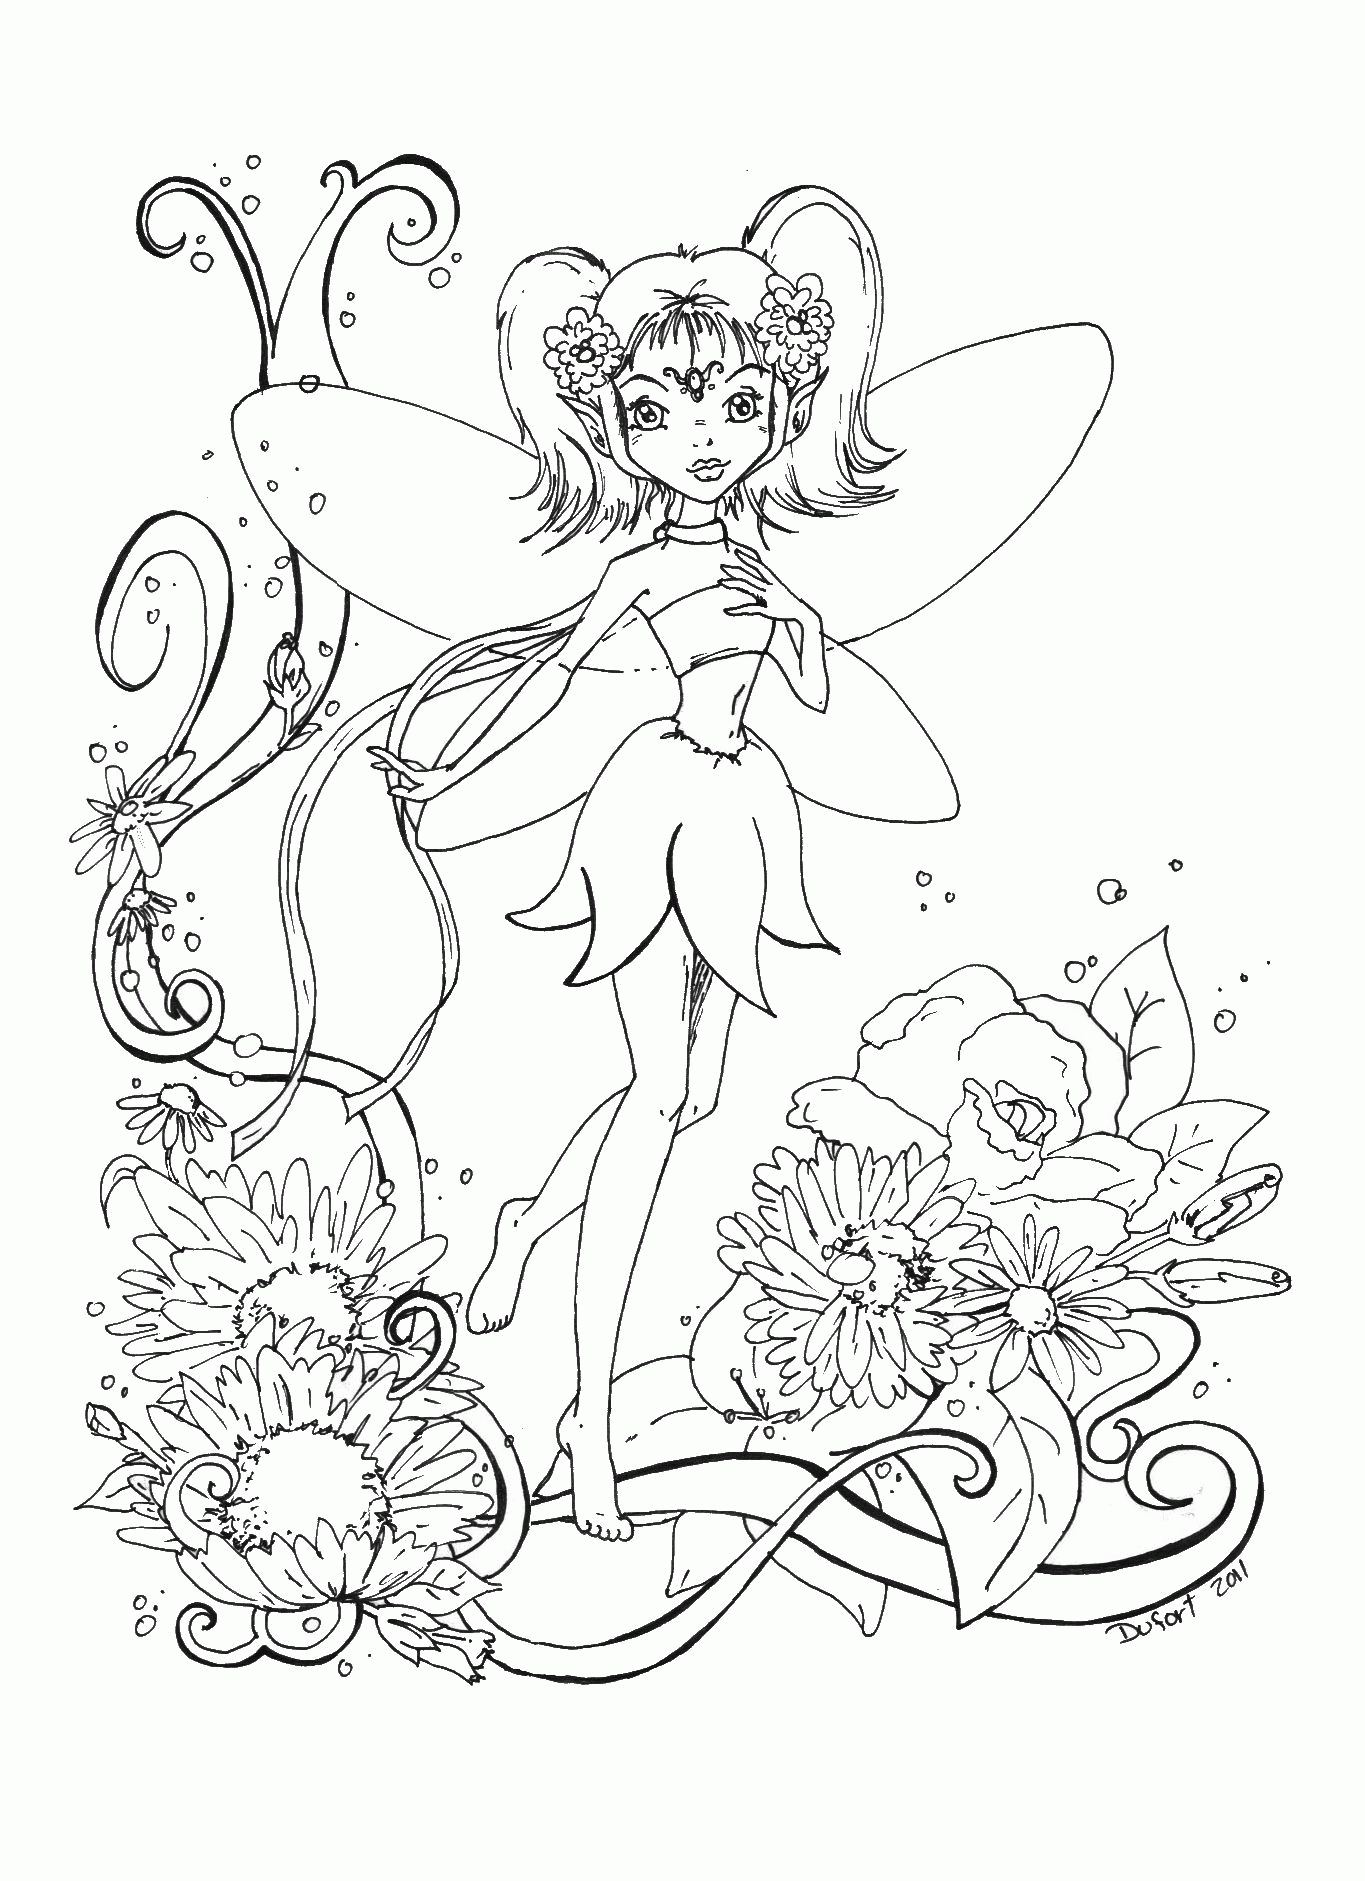 Free Fairy With Mirror Coloring Pages For Adult - VoteForVerde.com